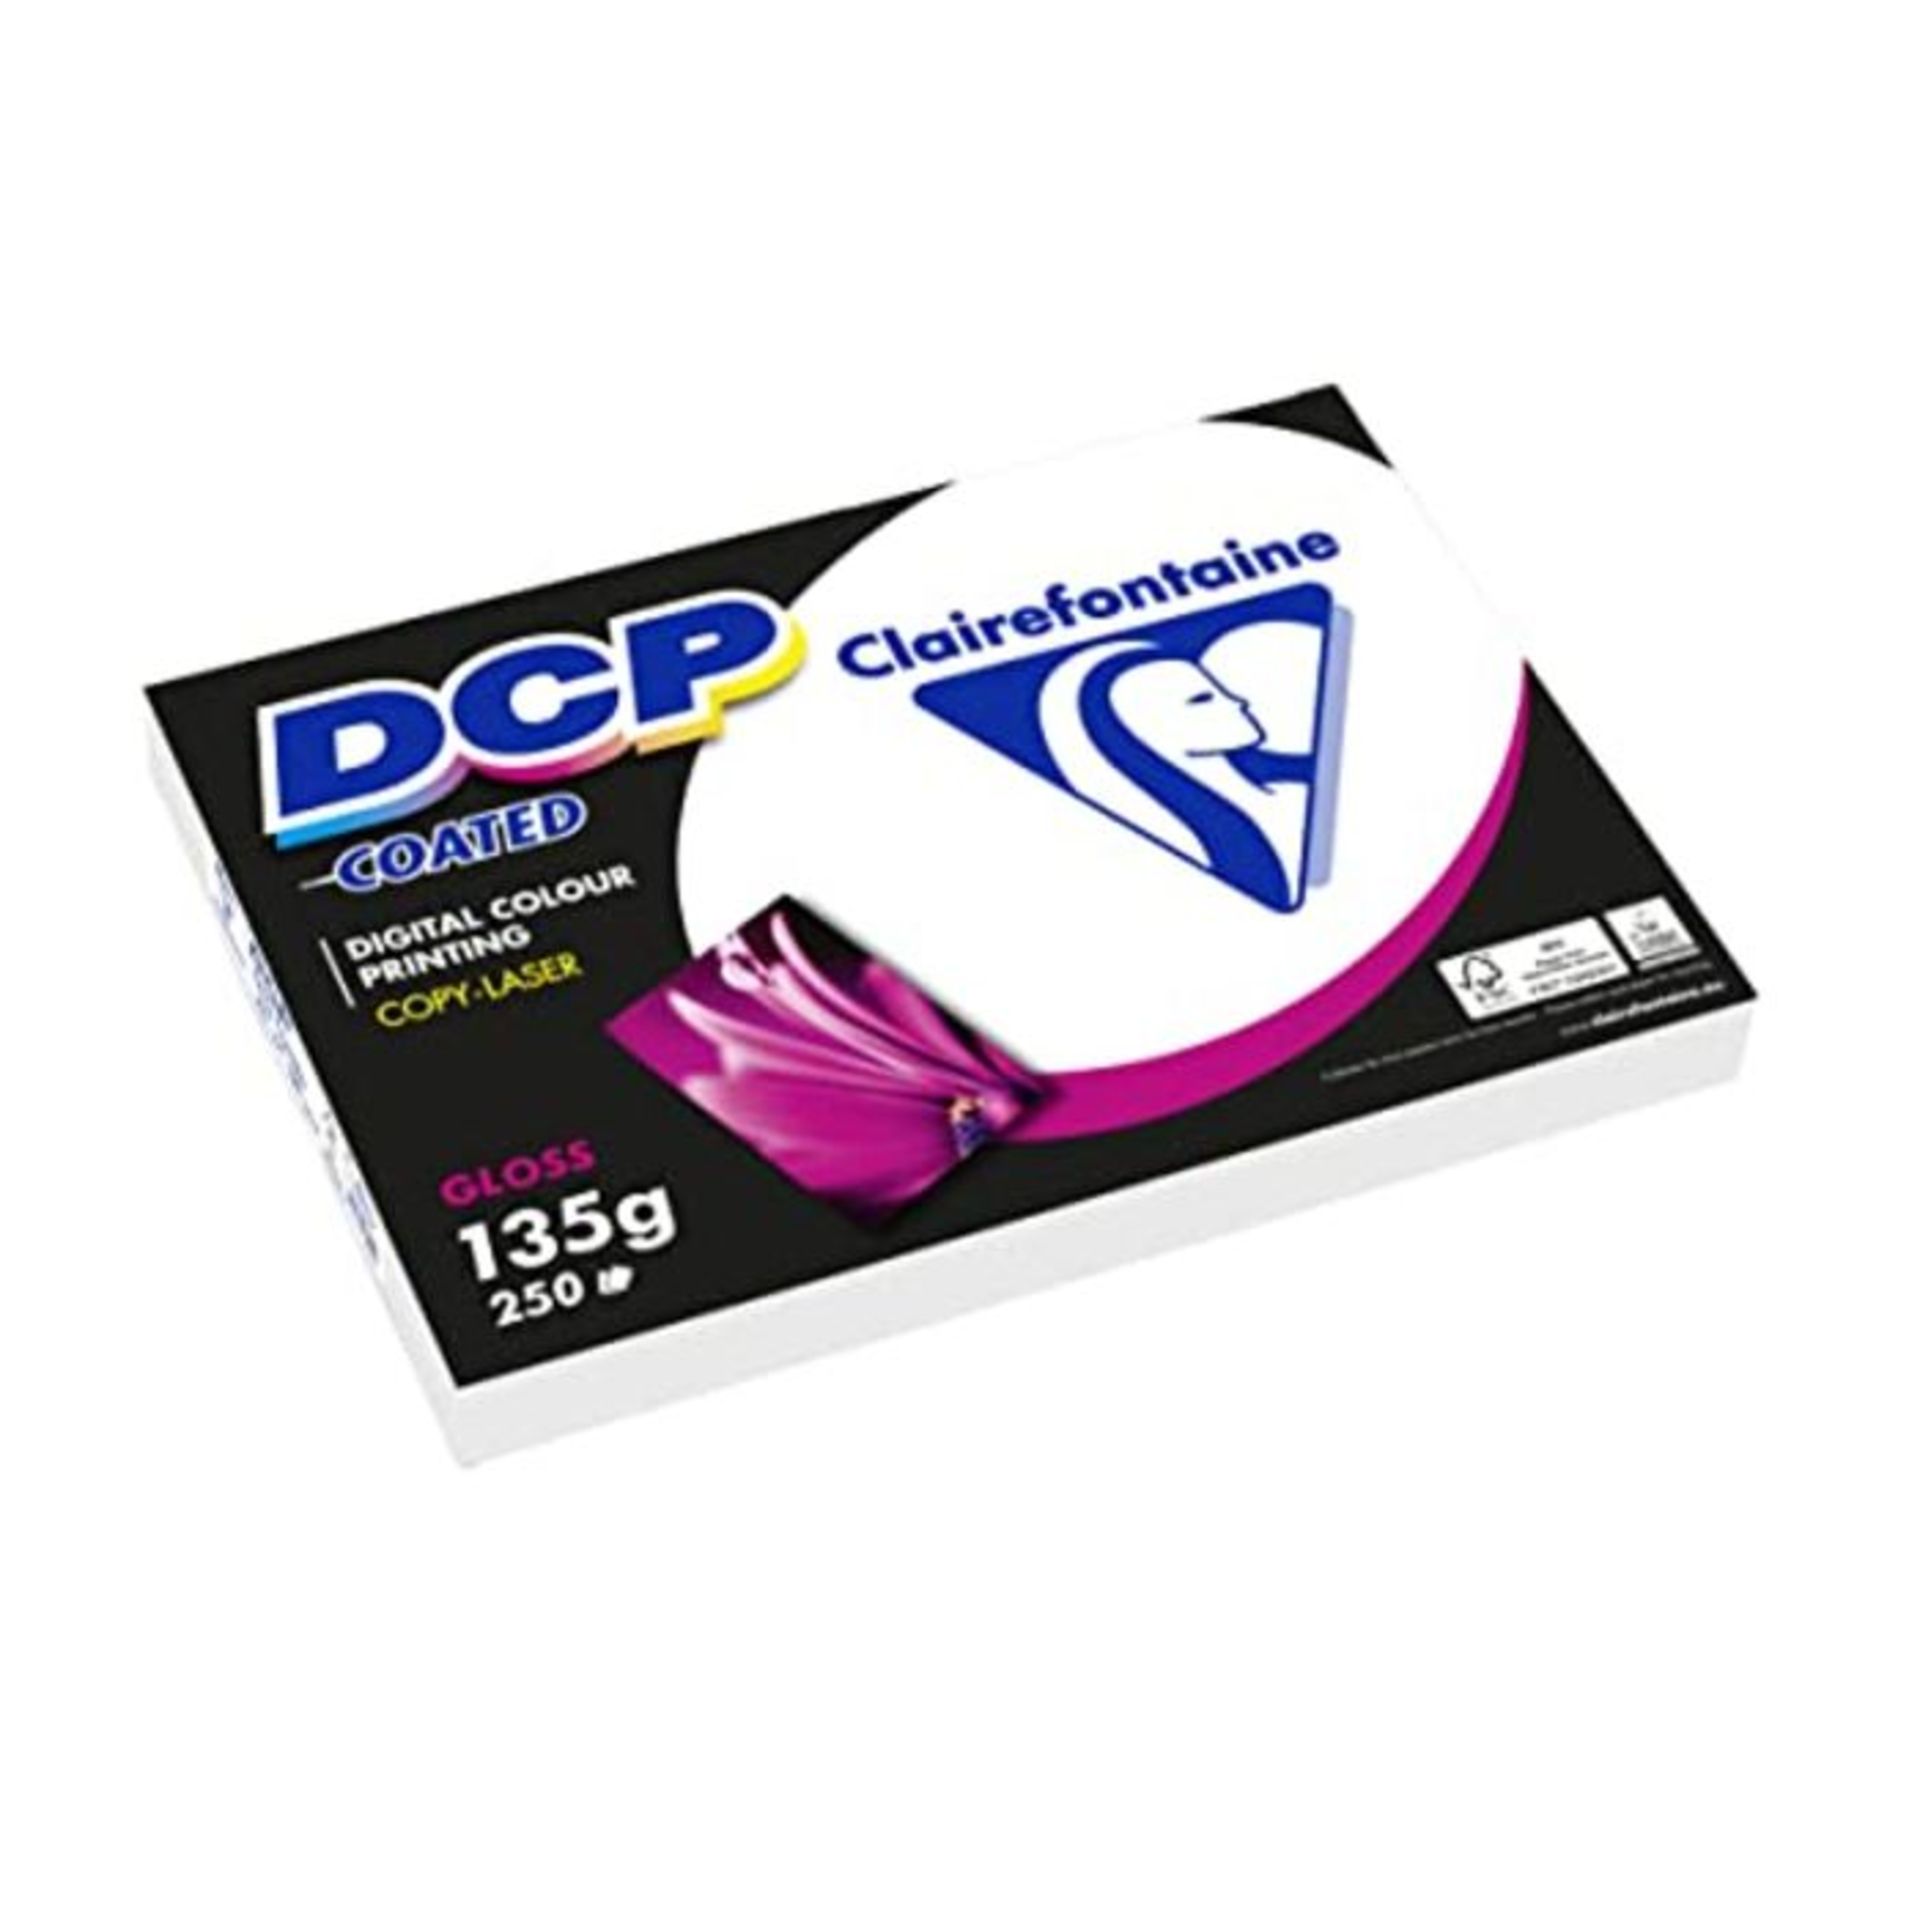 Clairefontaine Printing Paper 250 x A3 Sheets, 135 g DCP Glossy Coating on Both Sides